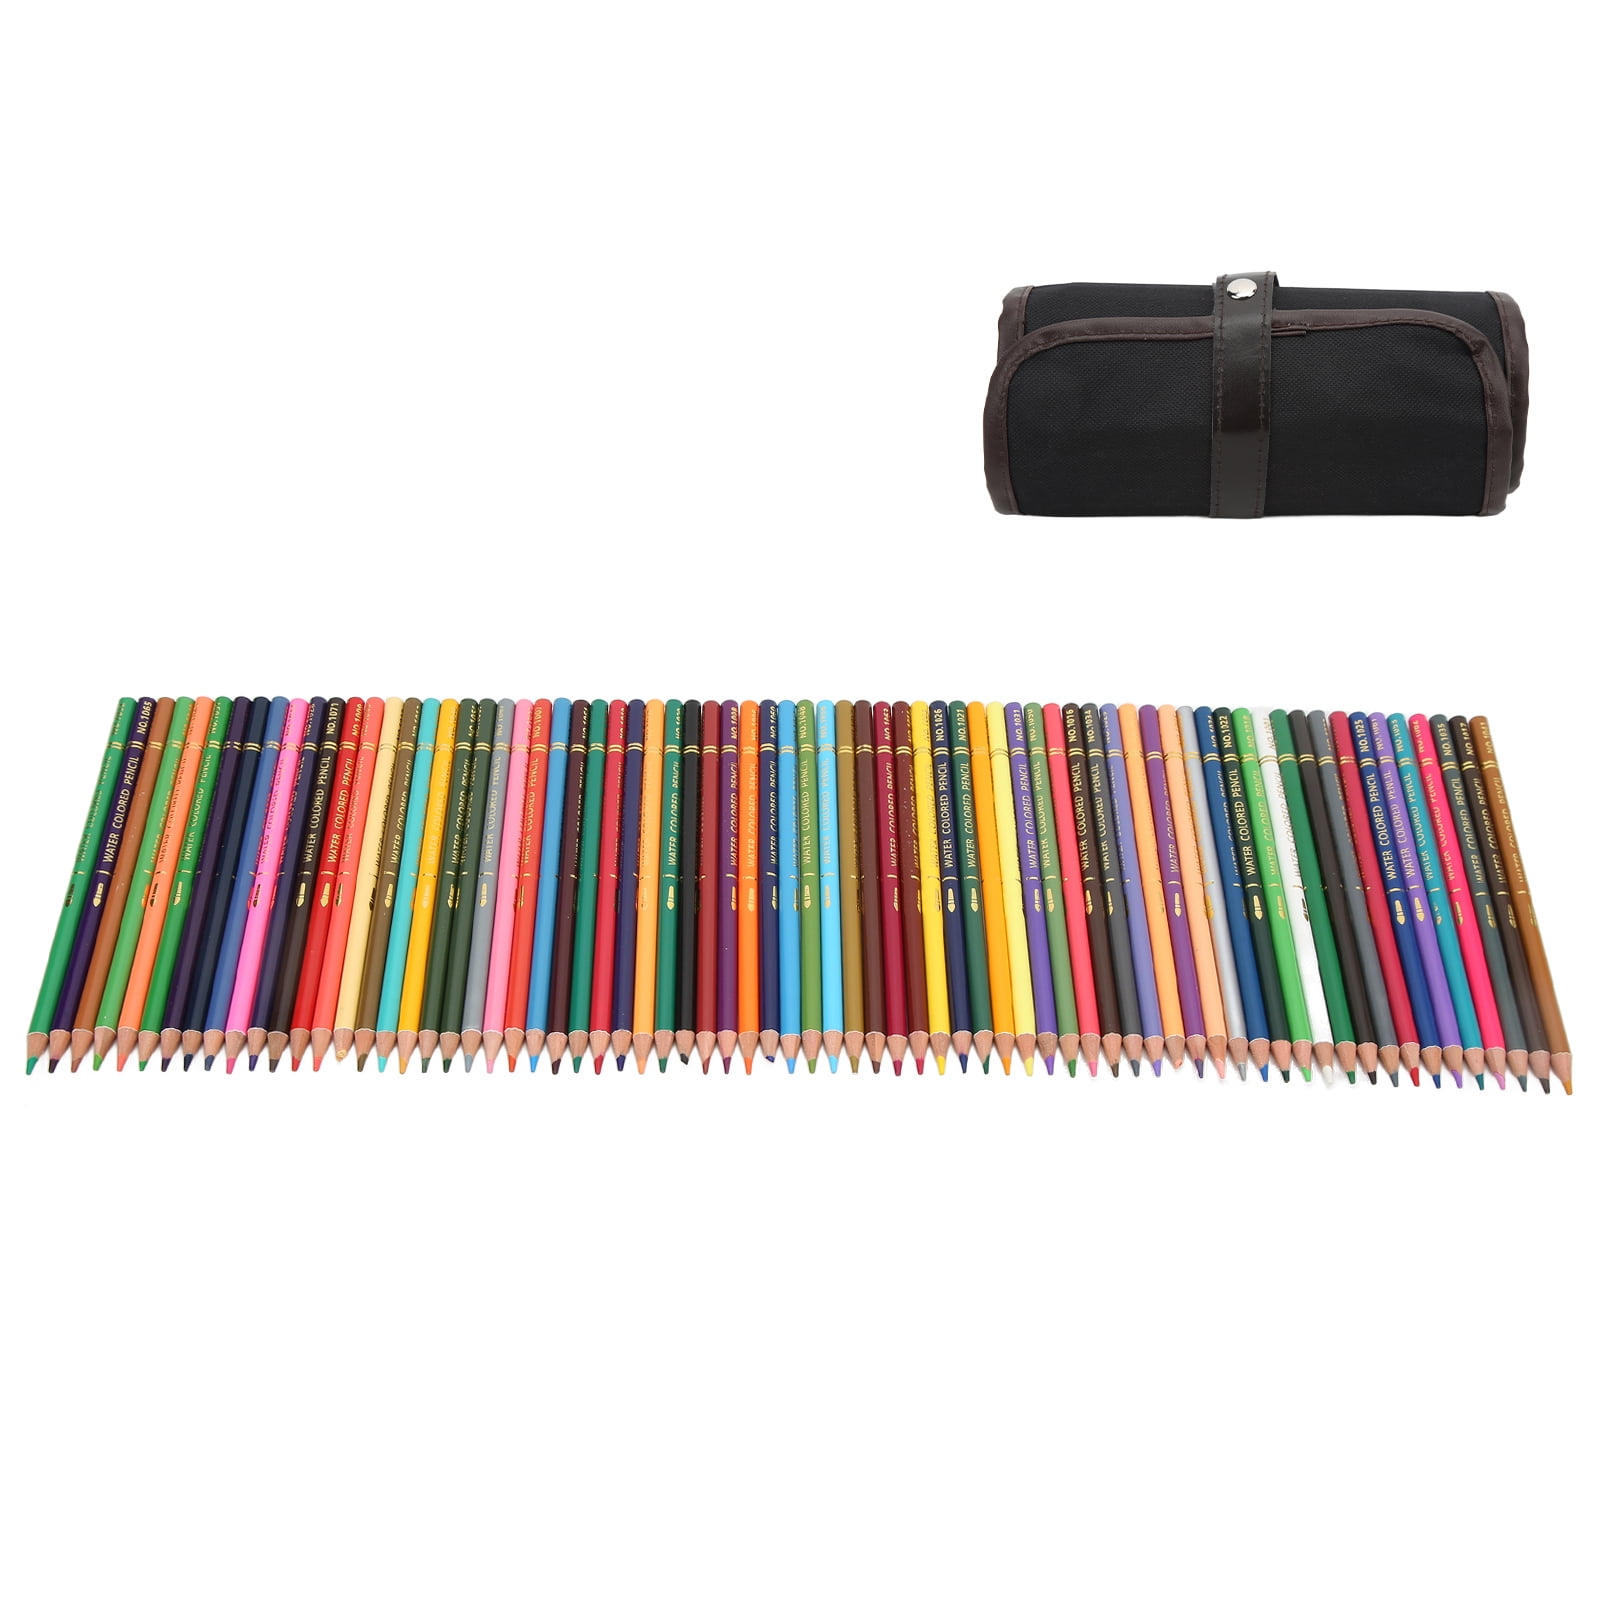 Sketching Pencils, Easy Blend Pencils Foldable Pen Case For Drawing For Gifts - Walmart.com